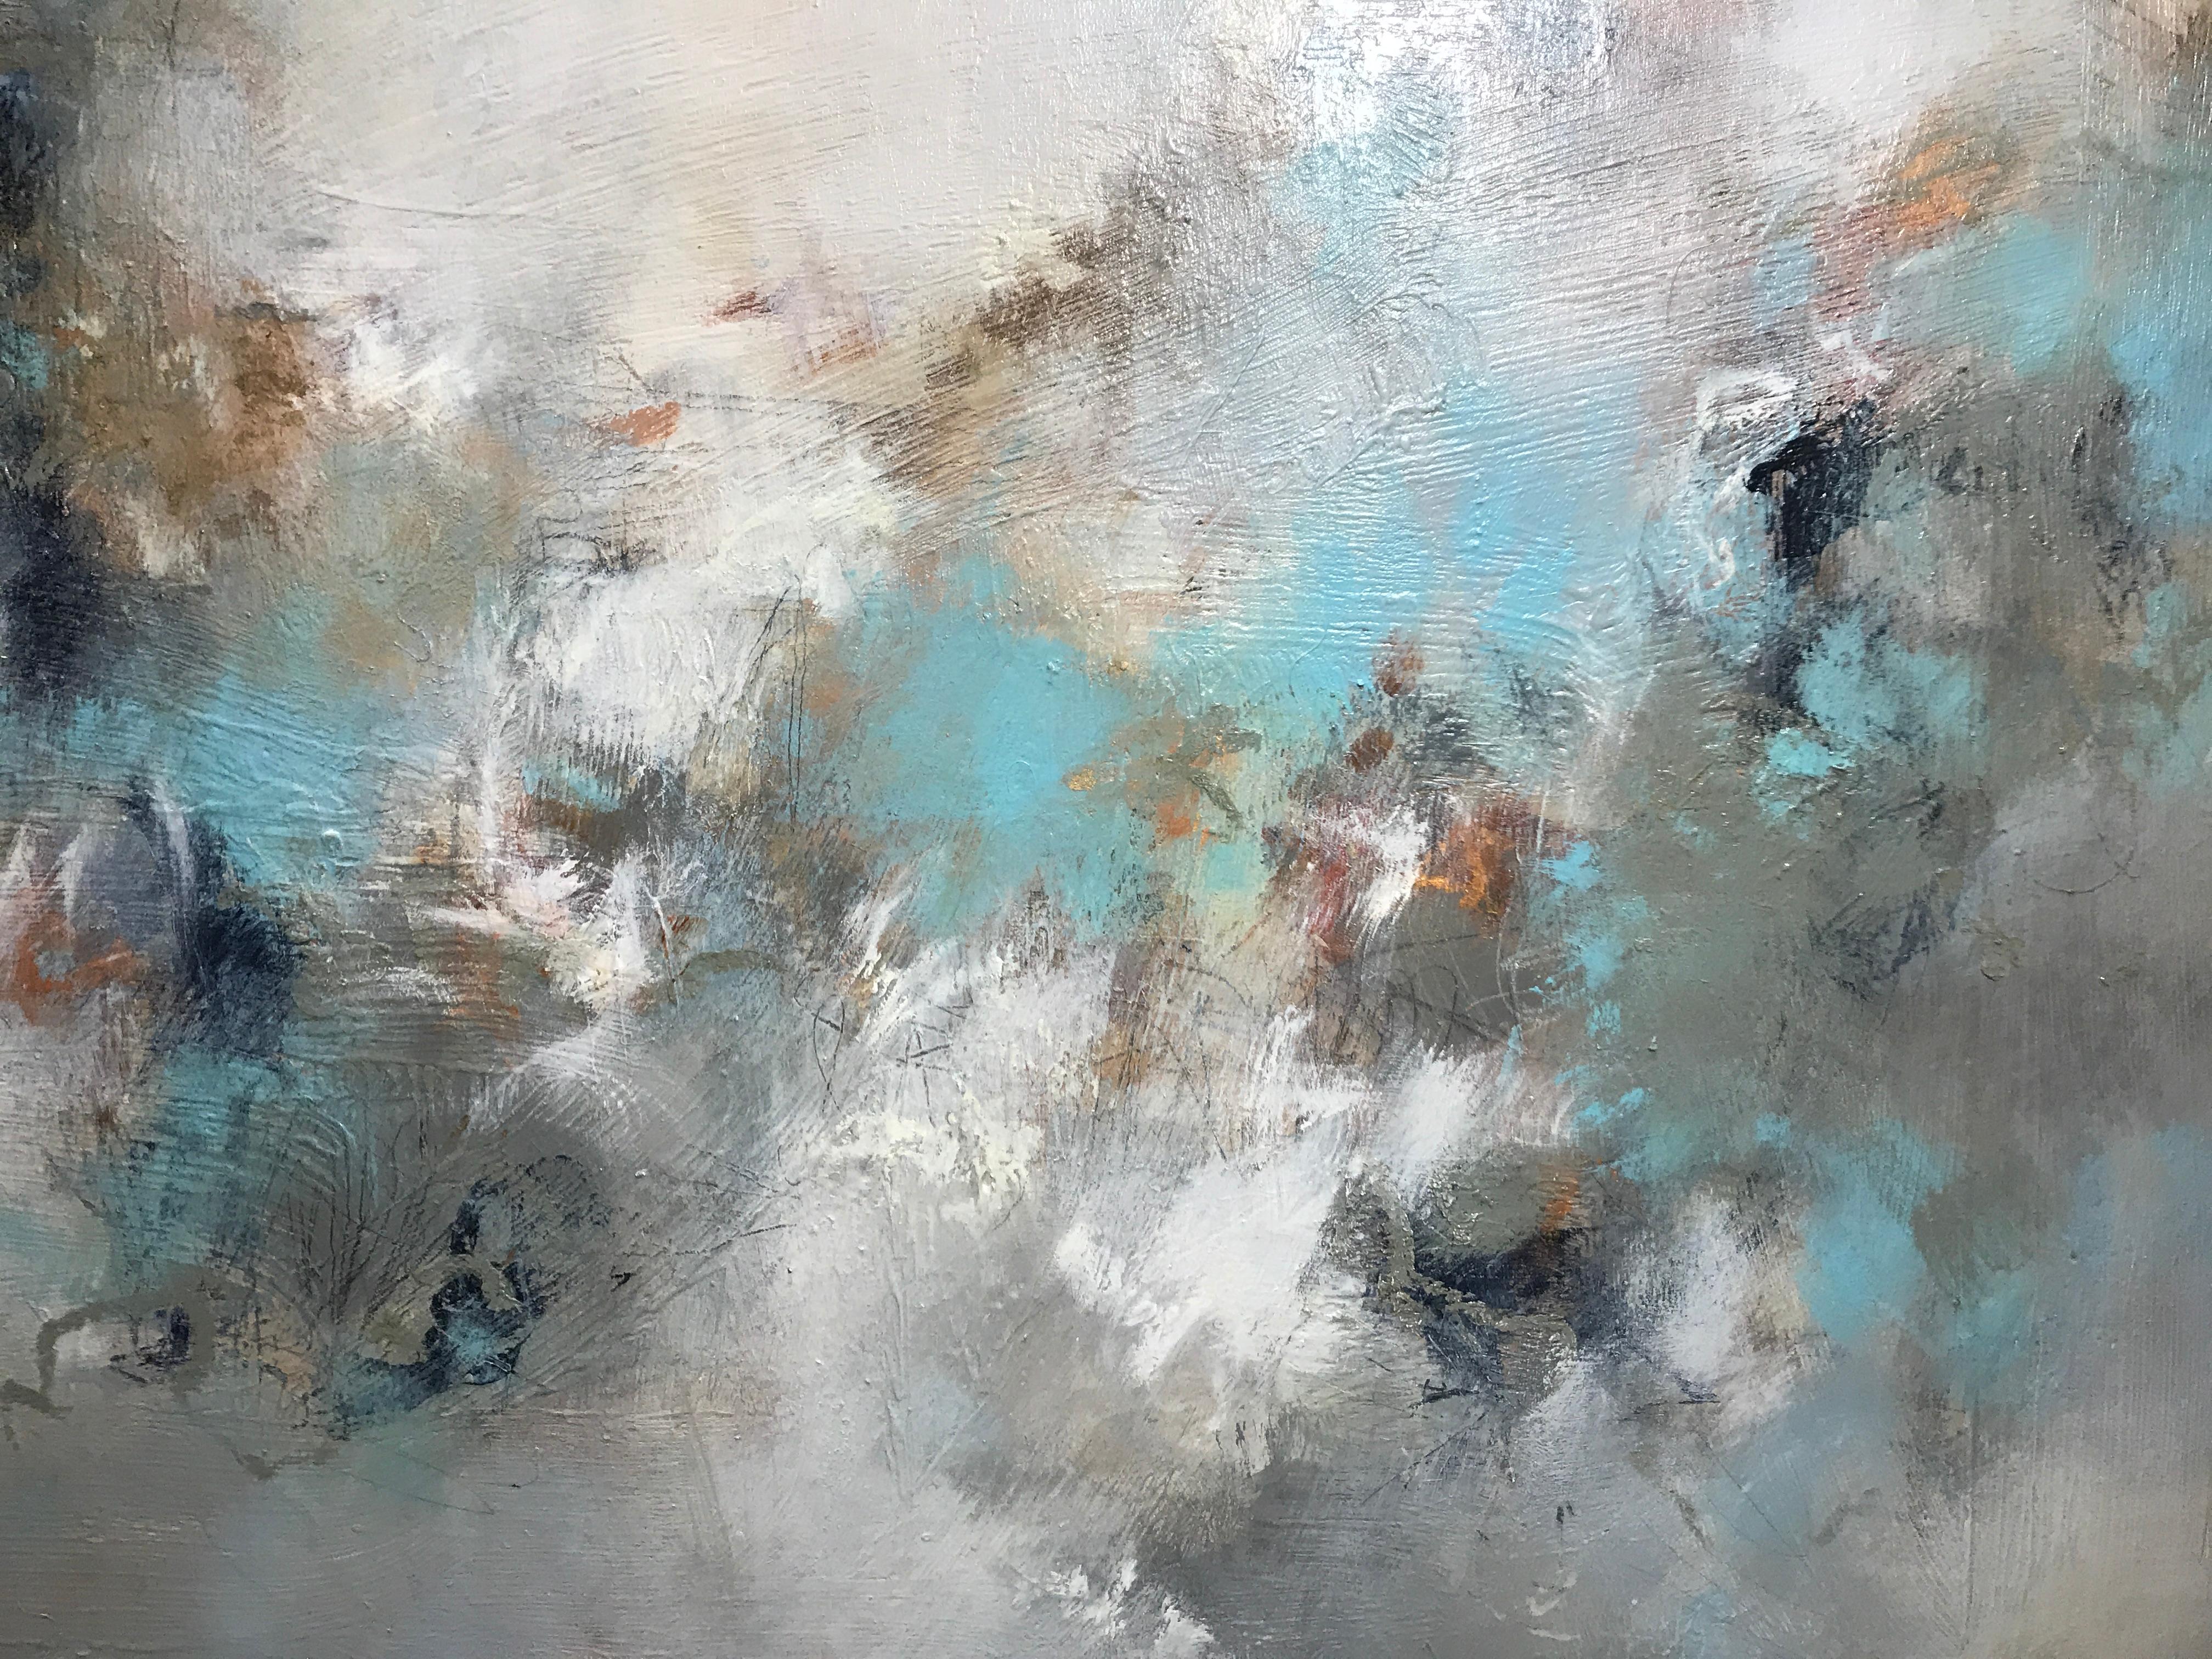 Softly Into the Light, Christina Doelling 2018 Abstract Mixed Media Painting 3